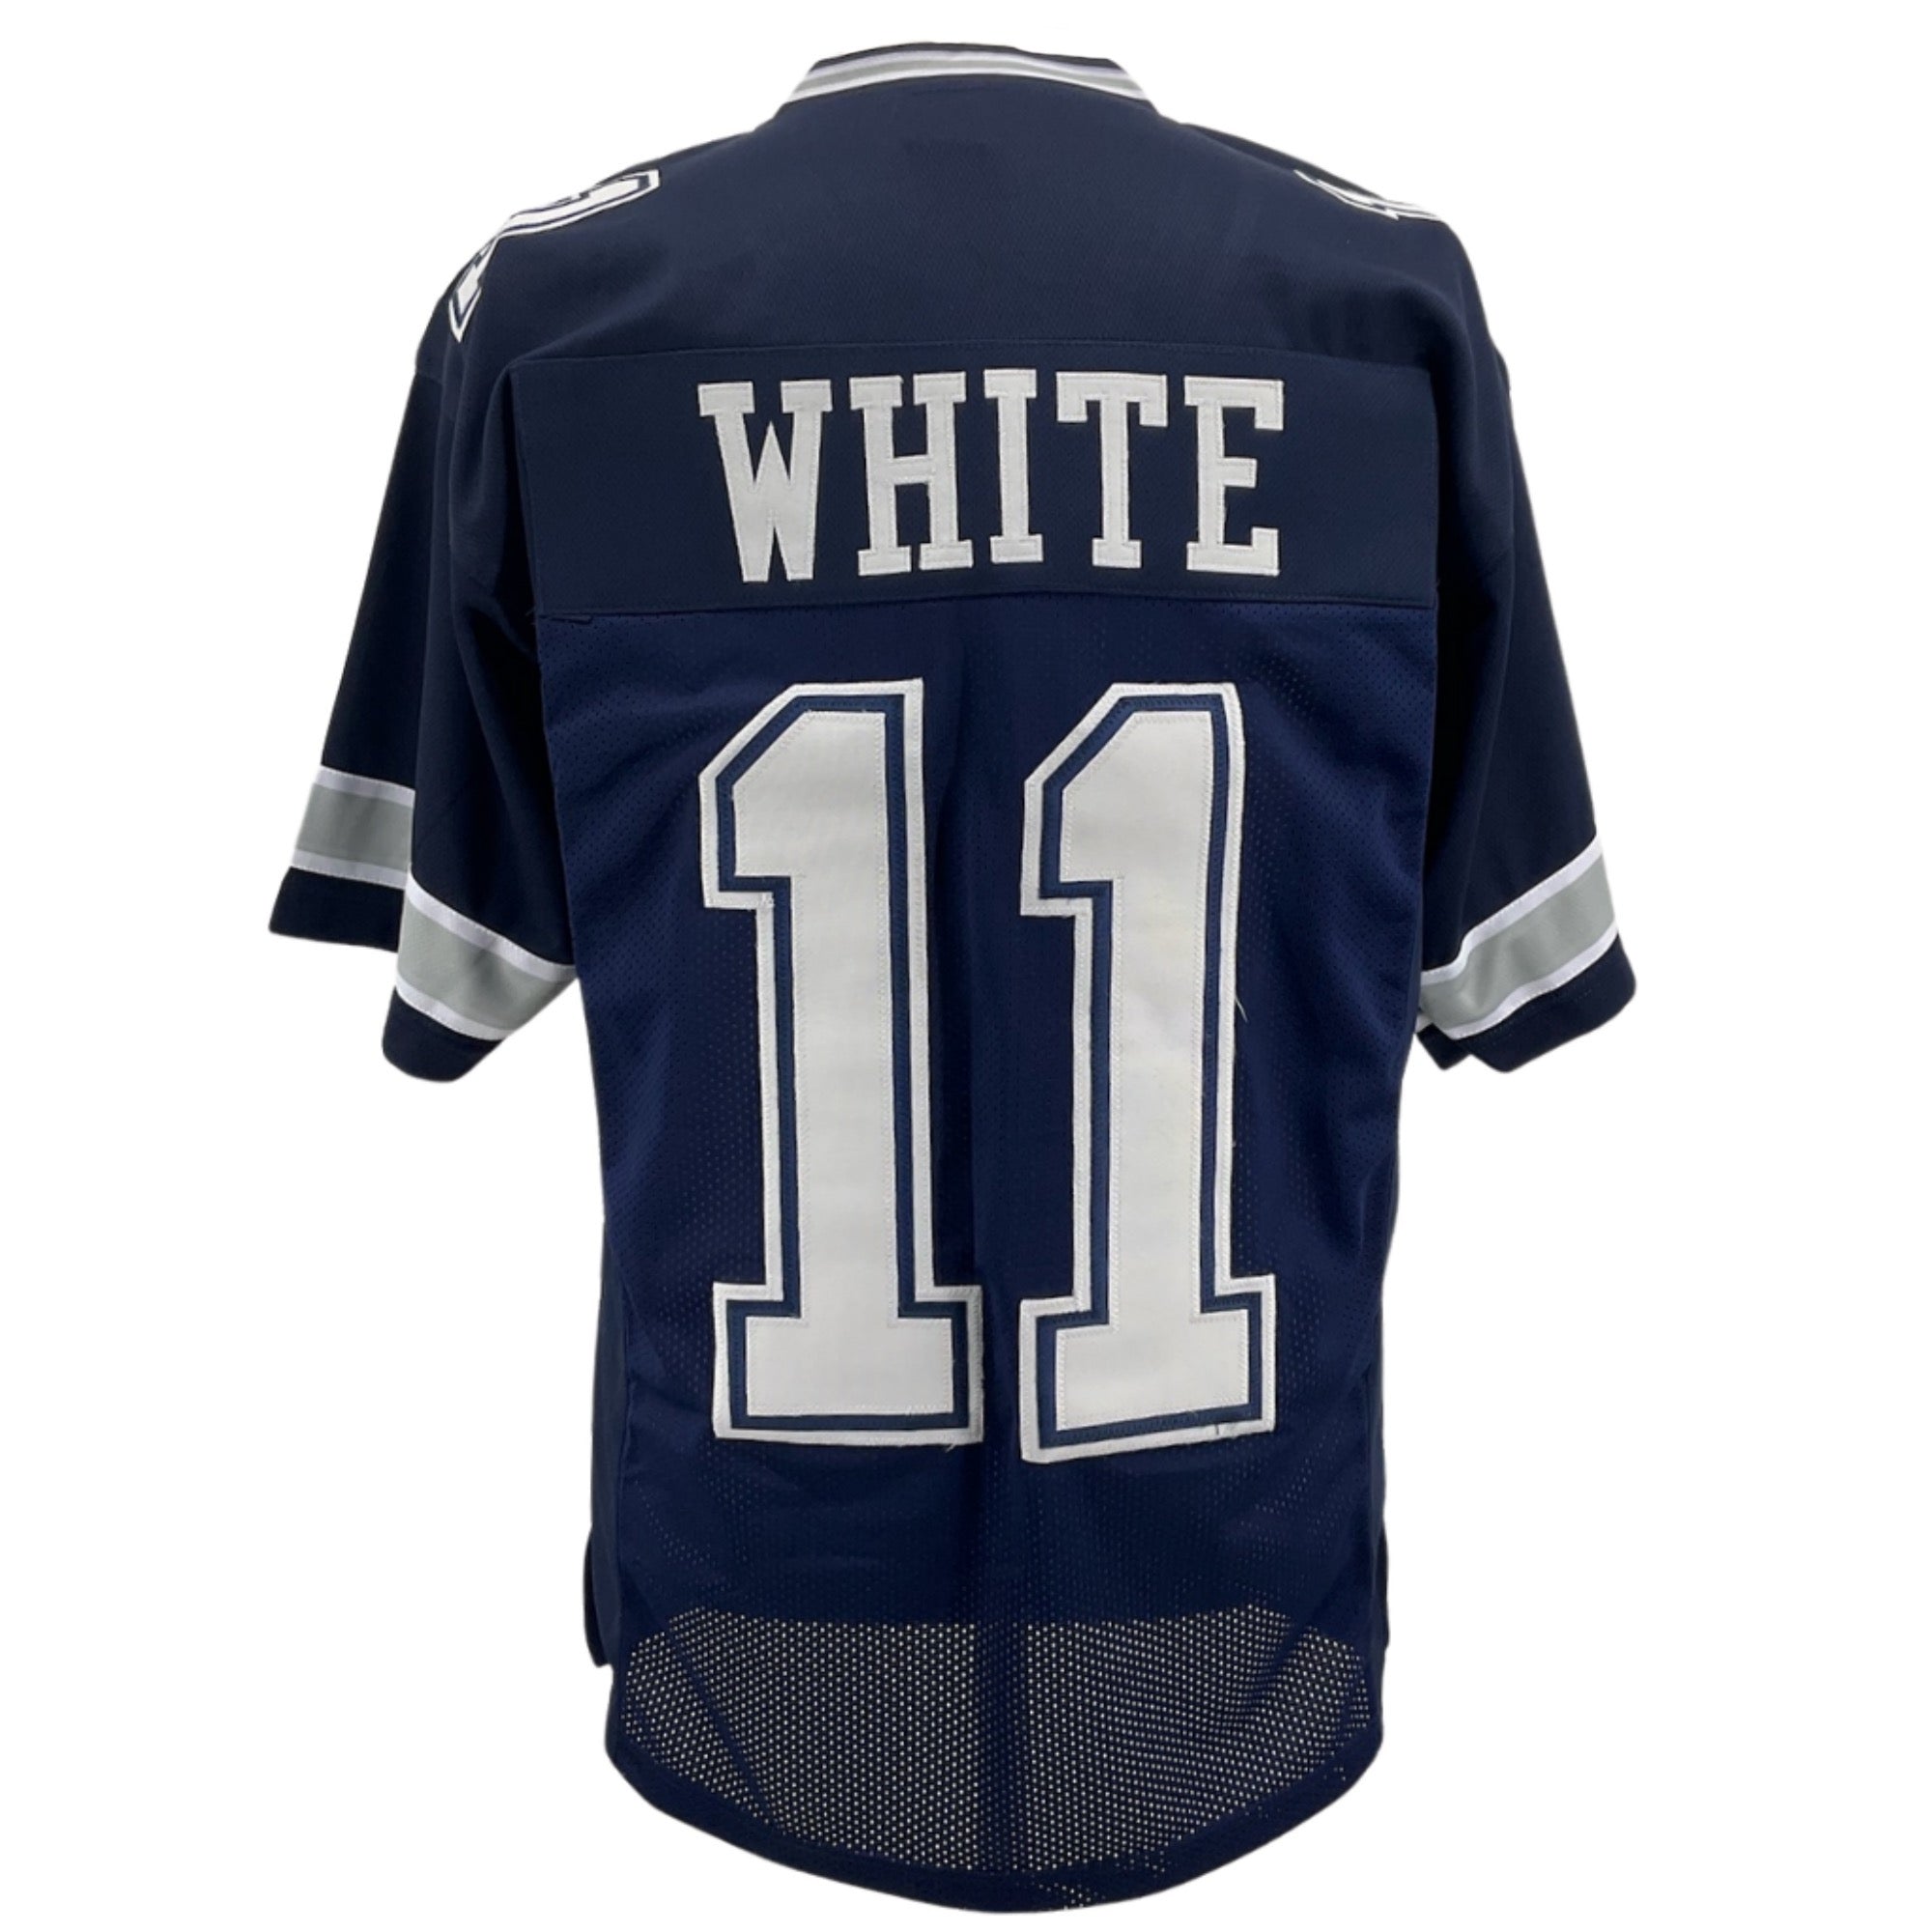 DANNY WHITE Dallas Cowboys NAVY BLUE Jersey M-5XL Unsigned Custom Sewn Stitched